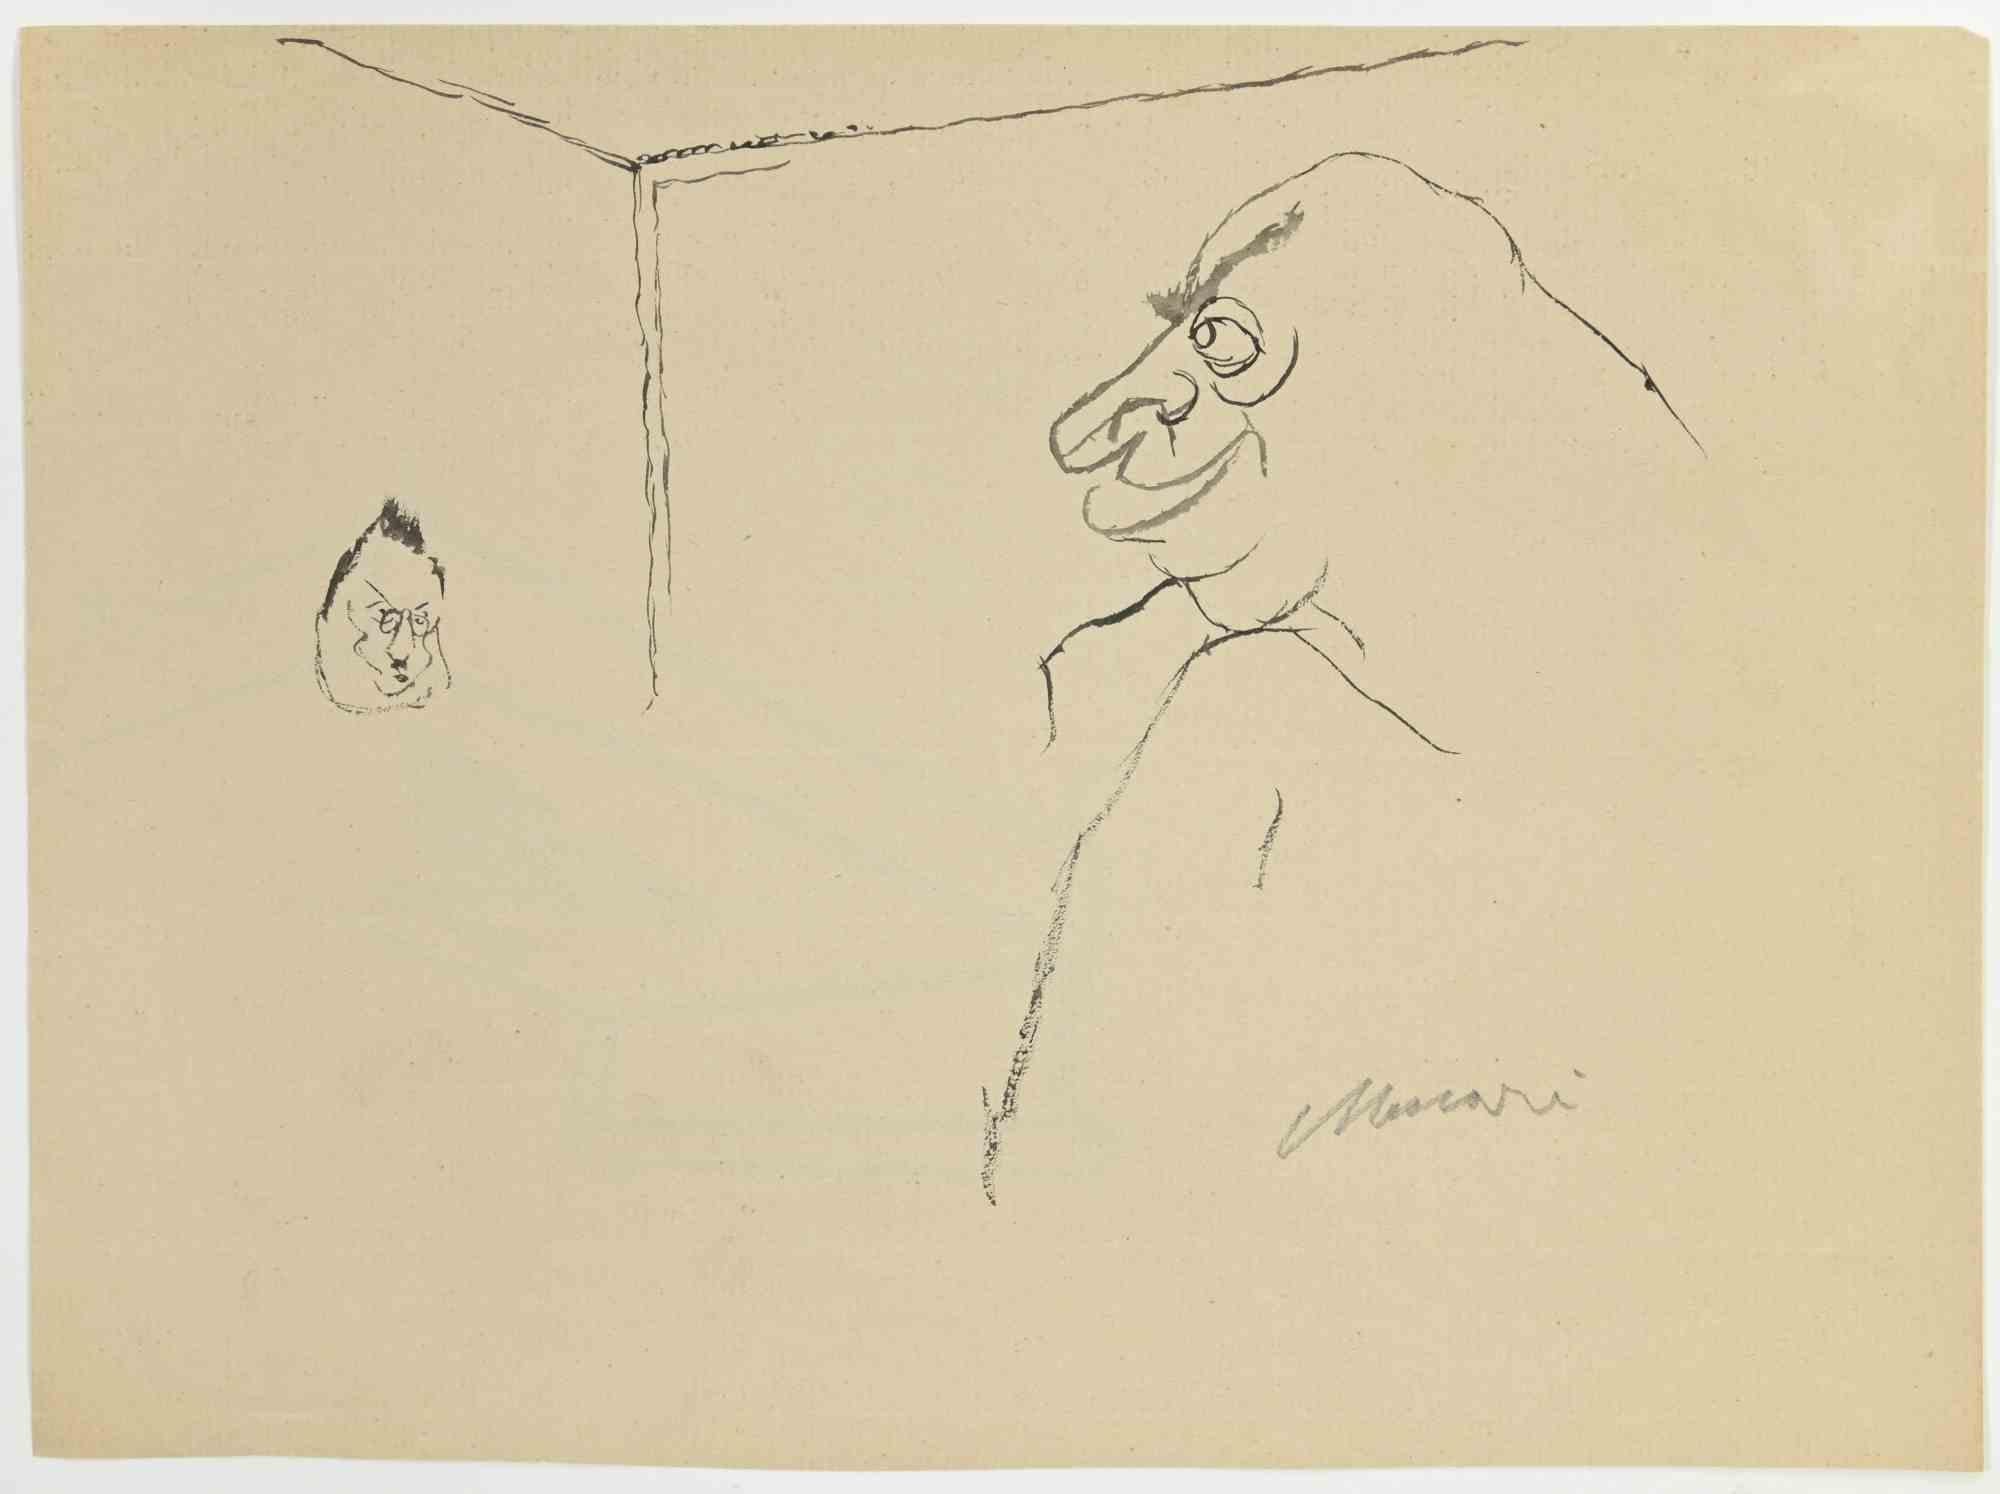 The Boss is a Pen Drawing realized by Mino Maccari  (1924-1989) in 1945 ca.

Hand-signed on the lower.

Good condition.

Mino Maccari (Siena, 1924-Rome, June 16, 1989) was an Italian writer, painter, engraver and journalist, winner of the